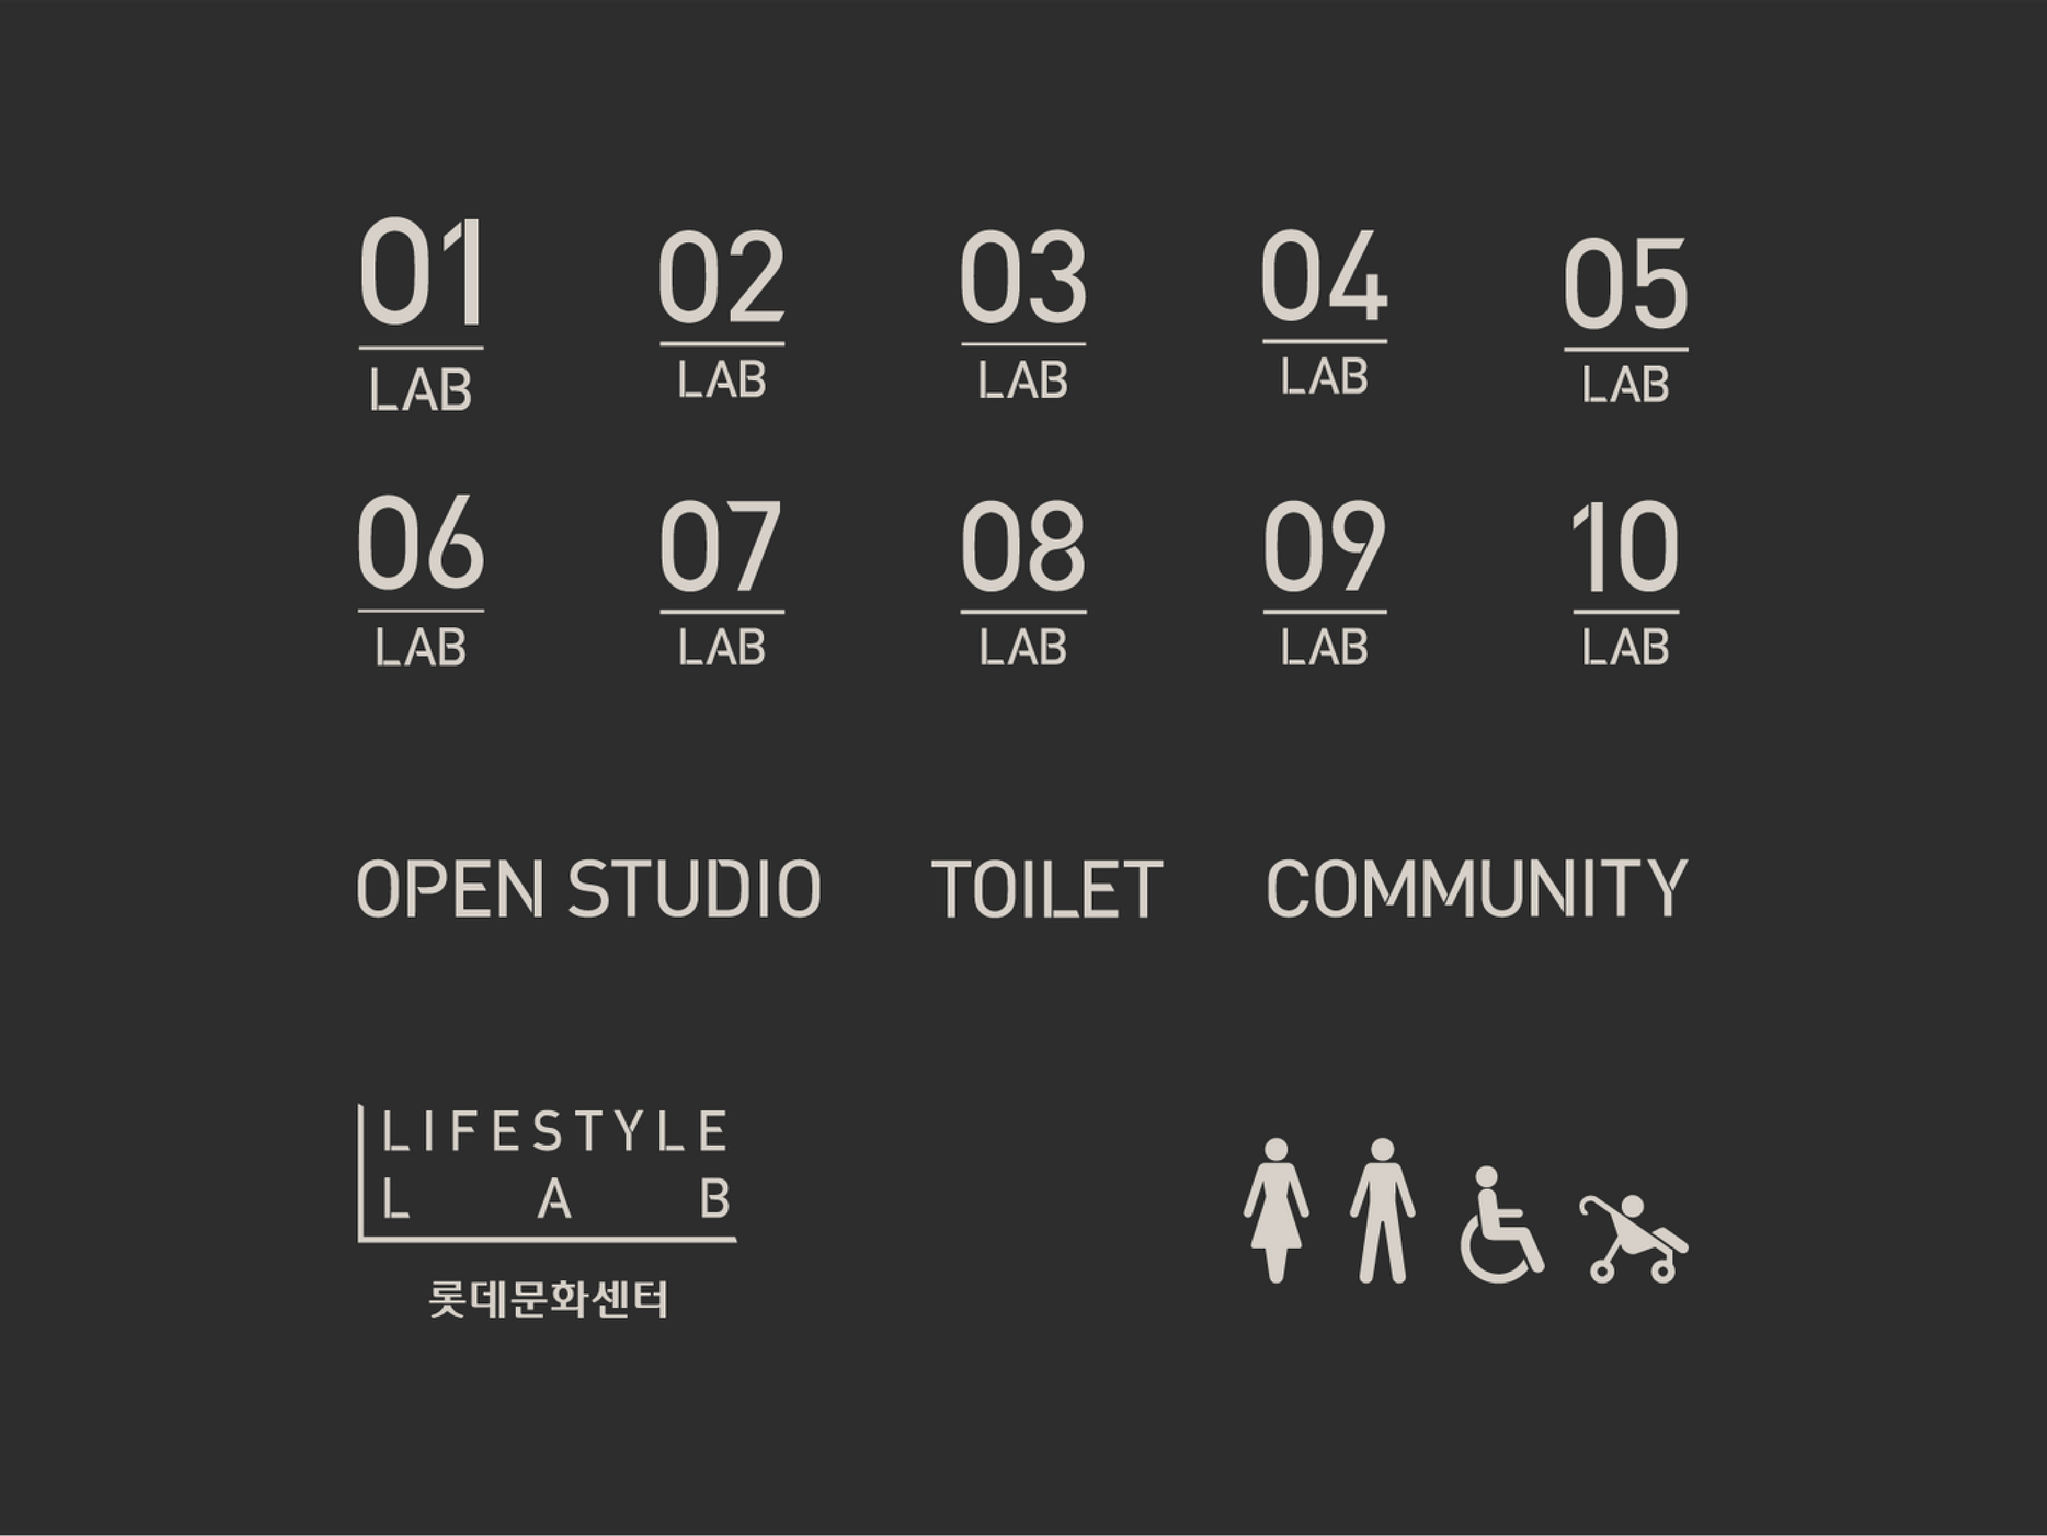 Lotte Lifestyle Lab Signage Project